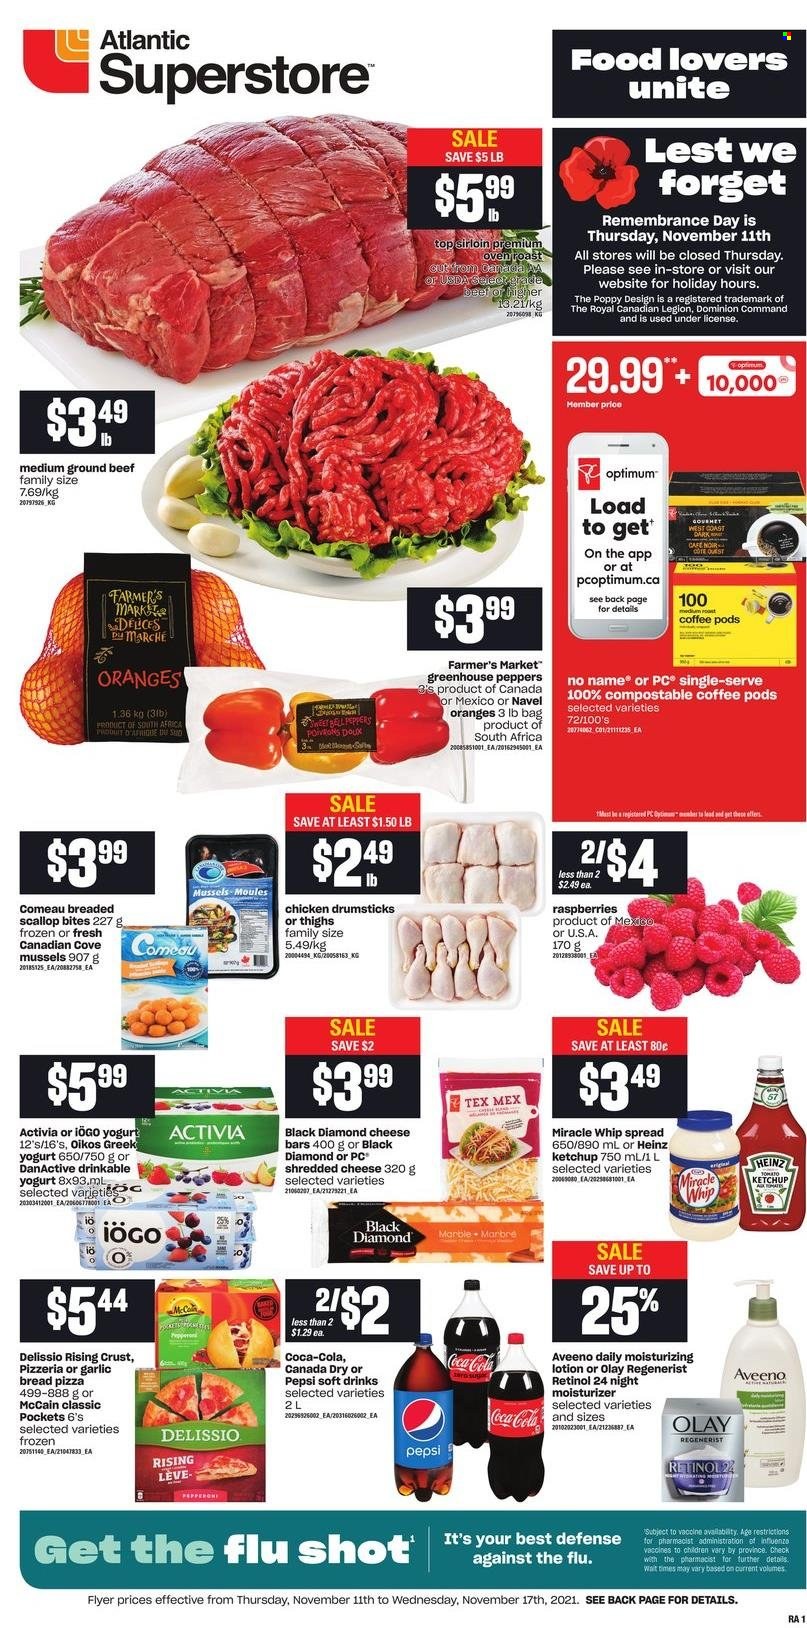 thumbnail - Atlantic Superstore Flyer - November 11, 2021 - November 17, 2021 - Sales products - bread, peppers, navel oranges, mussels, scallops, No Name, pizza, shredded cheese, greek yoghurt, yoghurt, Activia, Oikos, Miracle Whip, McCain, Heinz, pepper, Canada Dry, Coca-Cola, Pepsi, soft drink, coffee pods, chicken drumsticks, chicken, beef meat, ground beef, Aveeno, moisturizer, Olay, body lotion, Optimum, ketchup, oranges. Page 1.